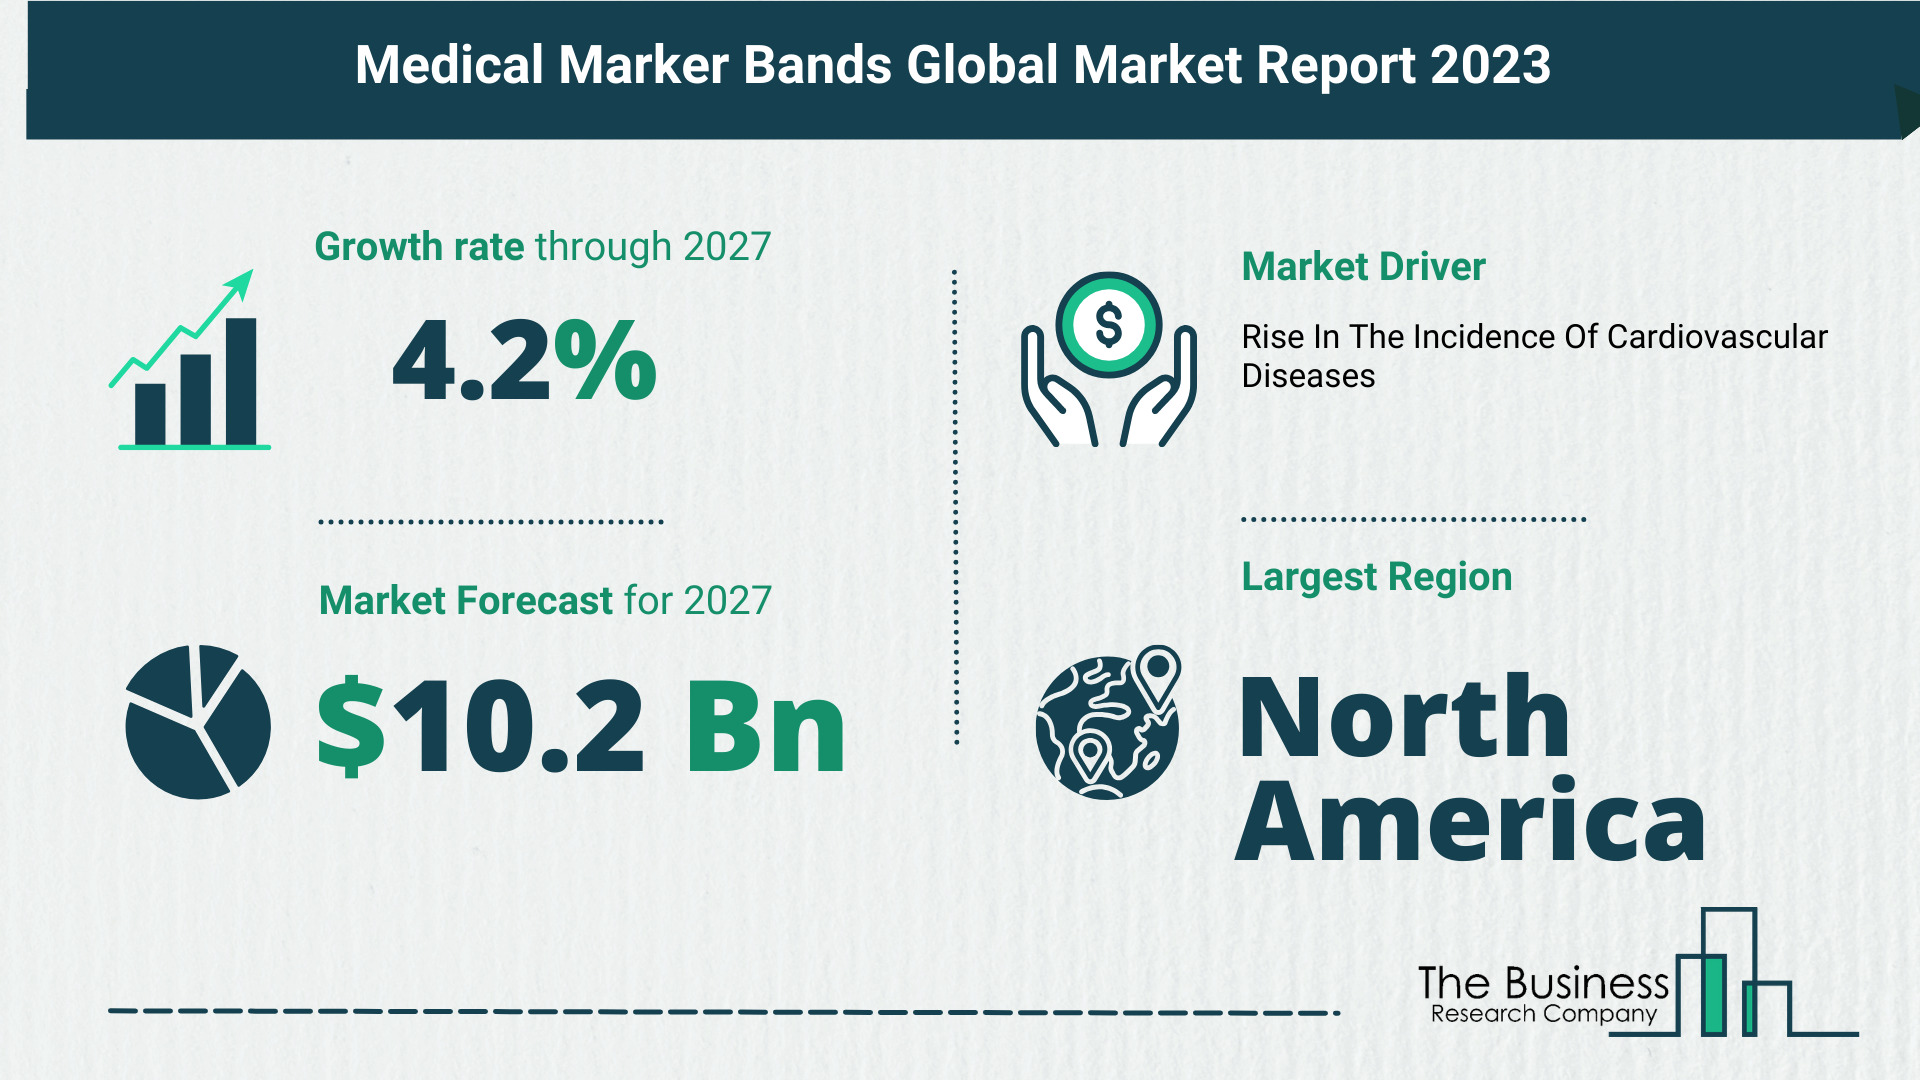 How Is The Medical Marker Bands Market Expected To Grow Through 2023-2032